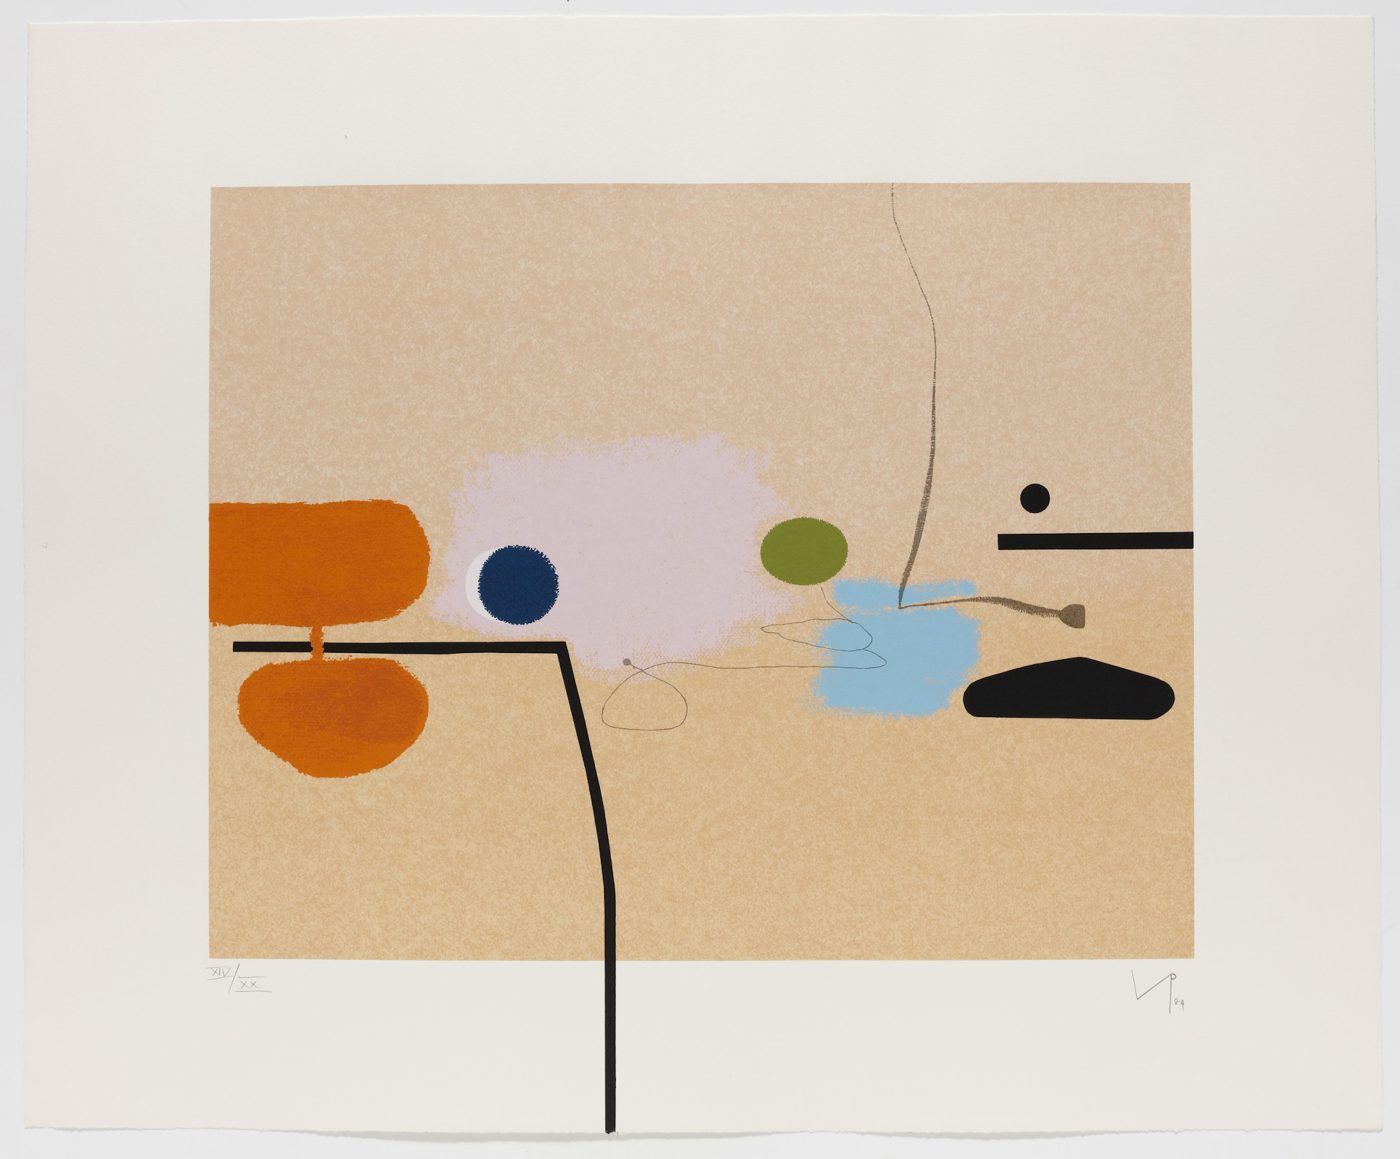 Victor Pasmore: Composite Image Orange and Pink, 1984